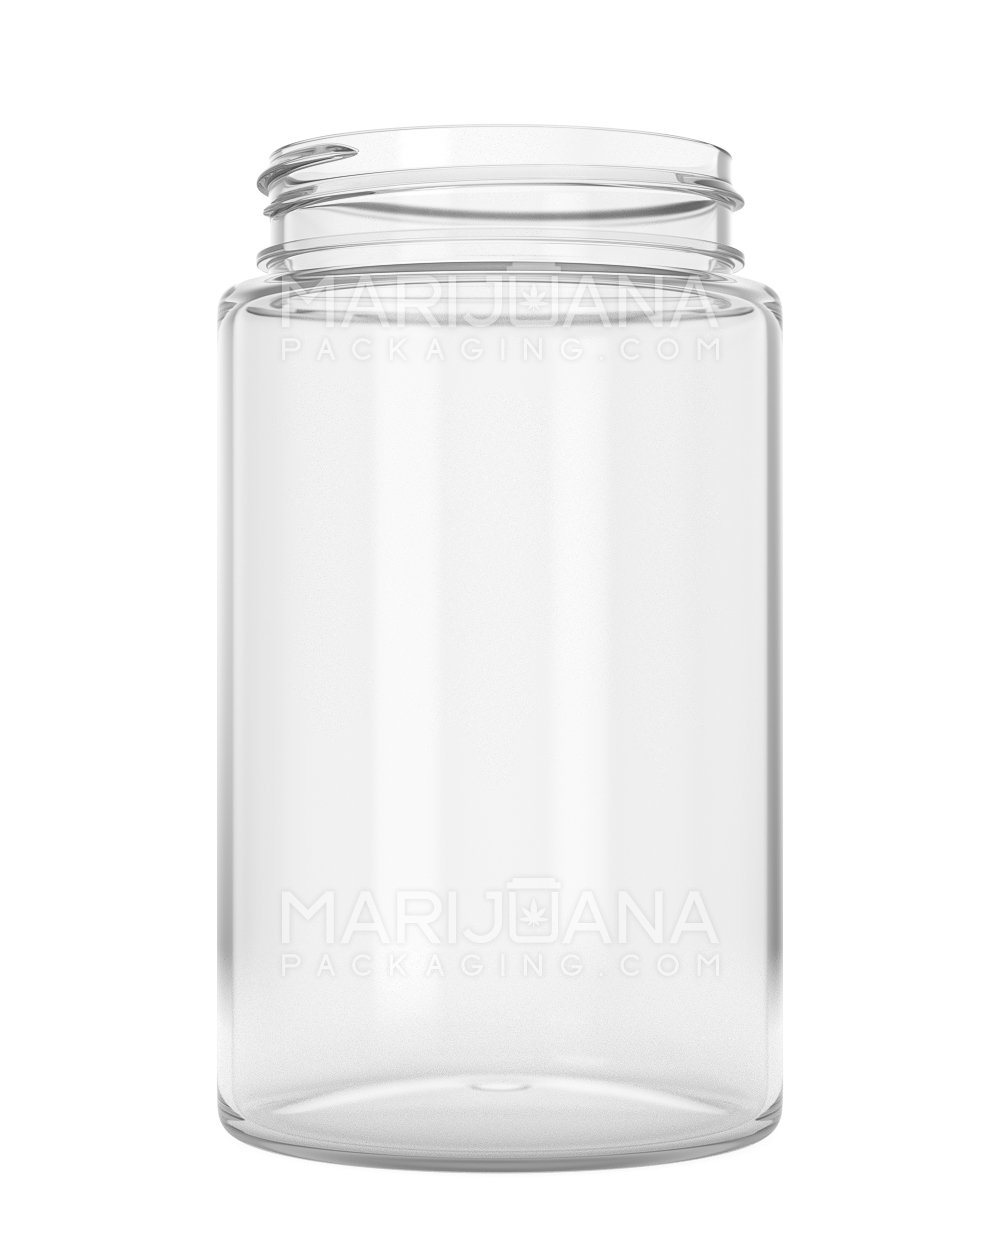 Straight Sided Clear Plastic Jars | 53mm - 7.5oz - 300 Count - 1